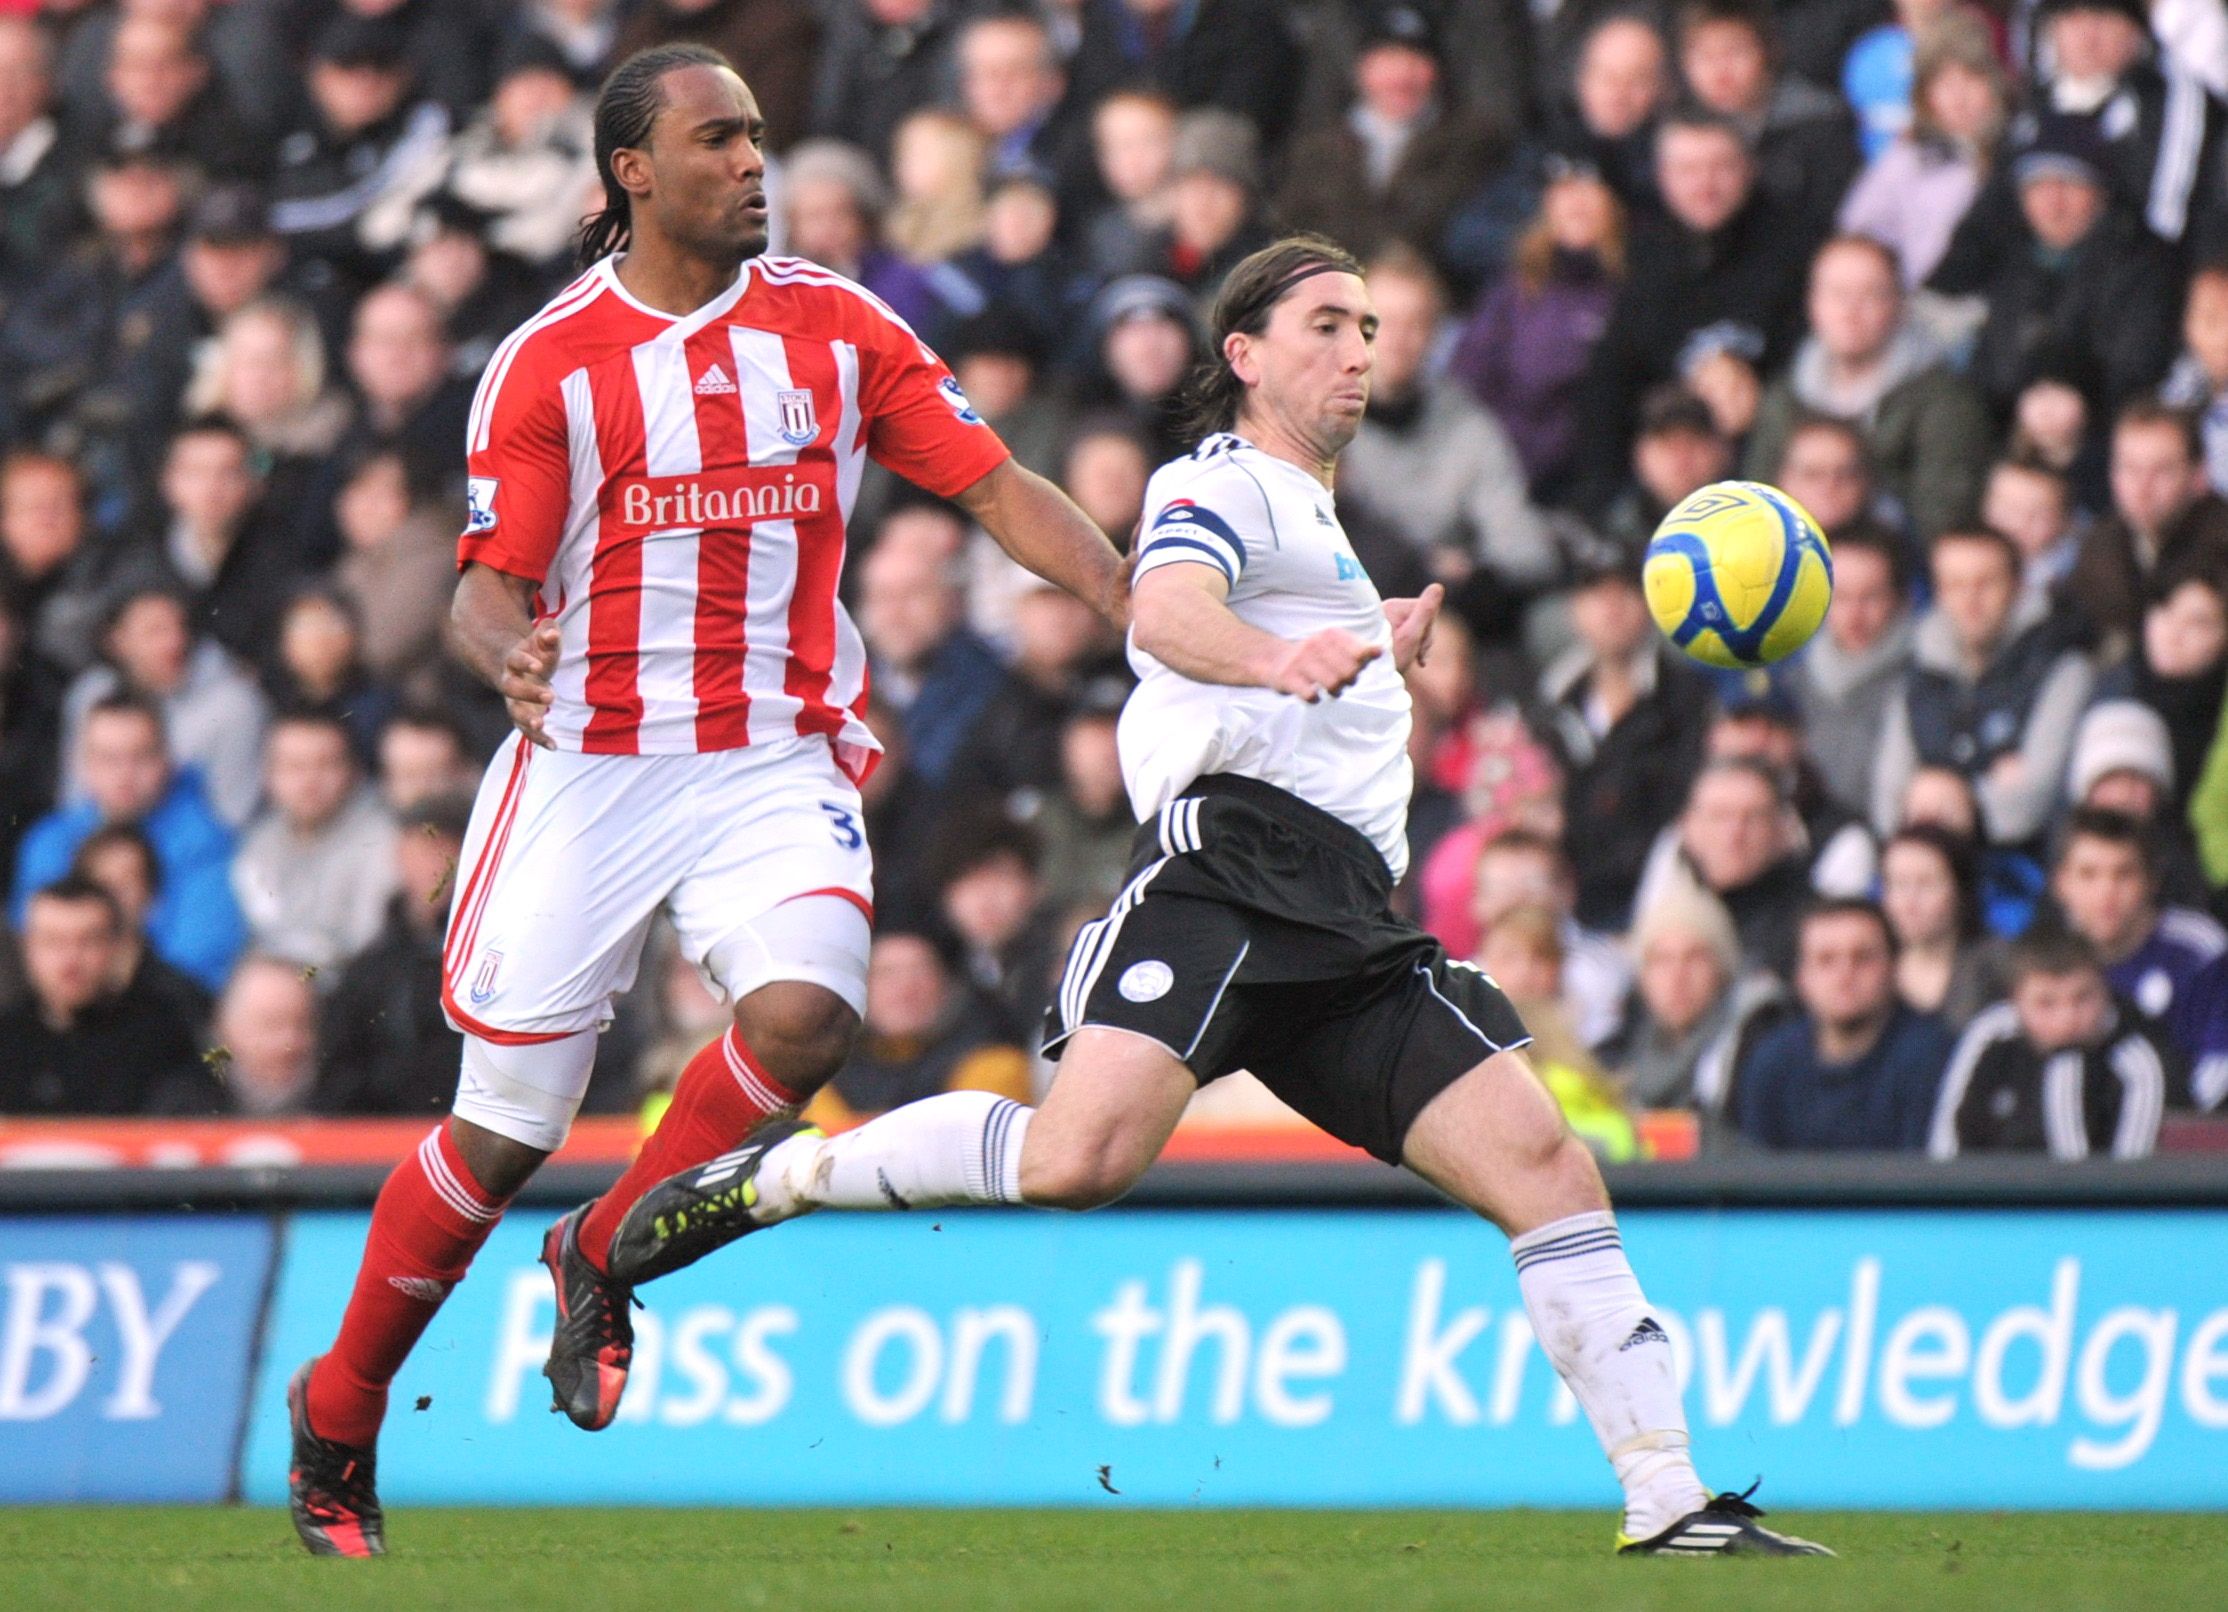 Football - Derby County v Stoke City FA Cup Fourth Round - Pride Park - 11/12 - 28/1/12 
Cameron Jerome - Stoke City in action against Shaun Barker - Derby County (R) 
Mandatory Credit: Action Images / Adam Holt